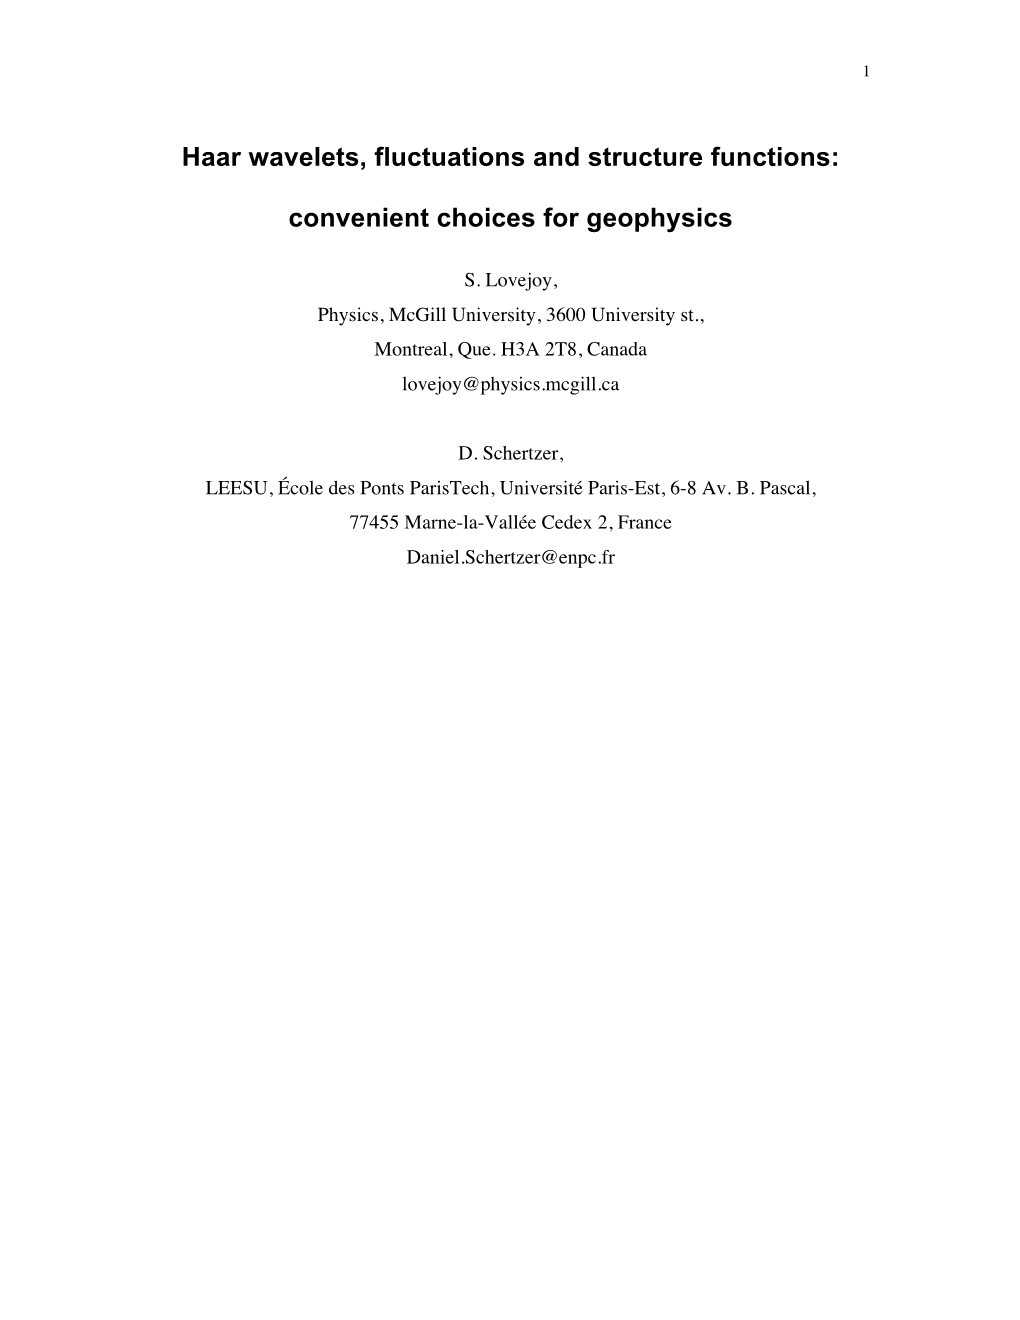 Haar Wavelets, Fluctuations and Structure Functions